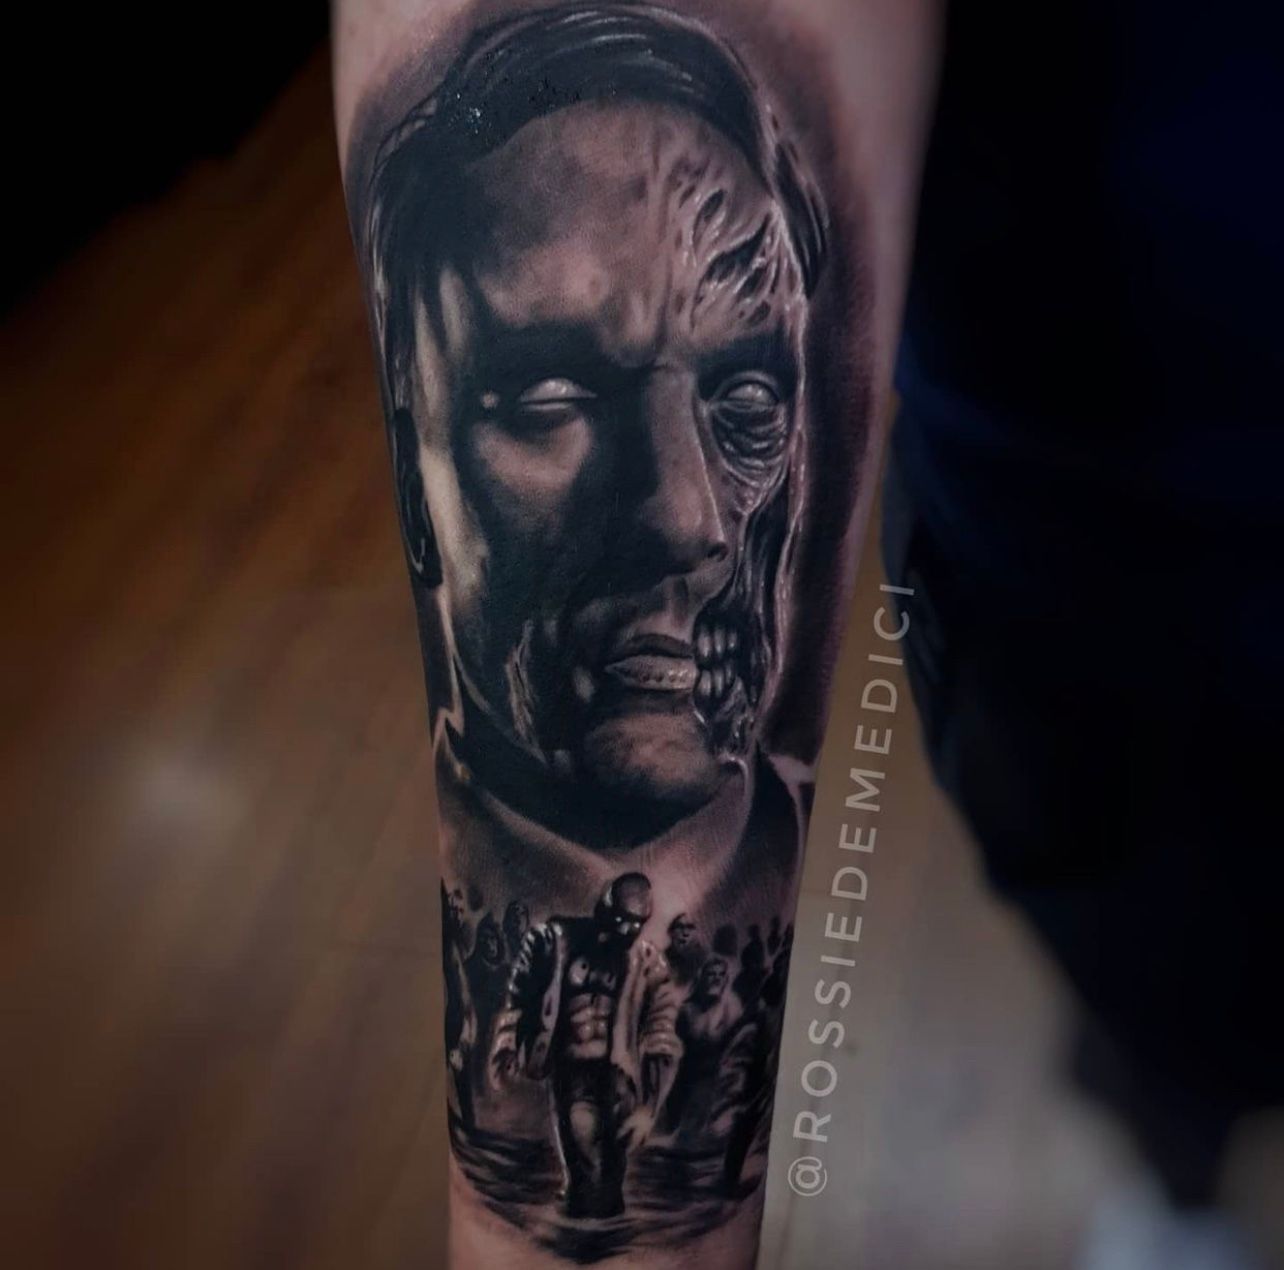 Kyle P on Twitter Treyarch ATVIAssist CallofDuty Check out this  Prestige Master Black Ops 2 tattoo I got done yesterday  httptcoE5XSD1qrYJ  Twitter